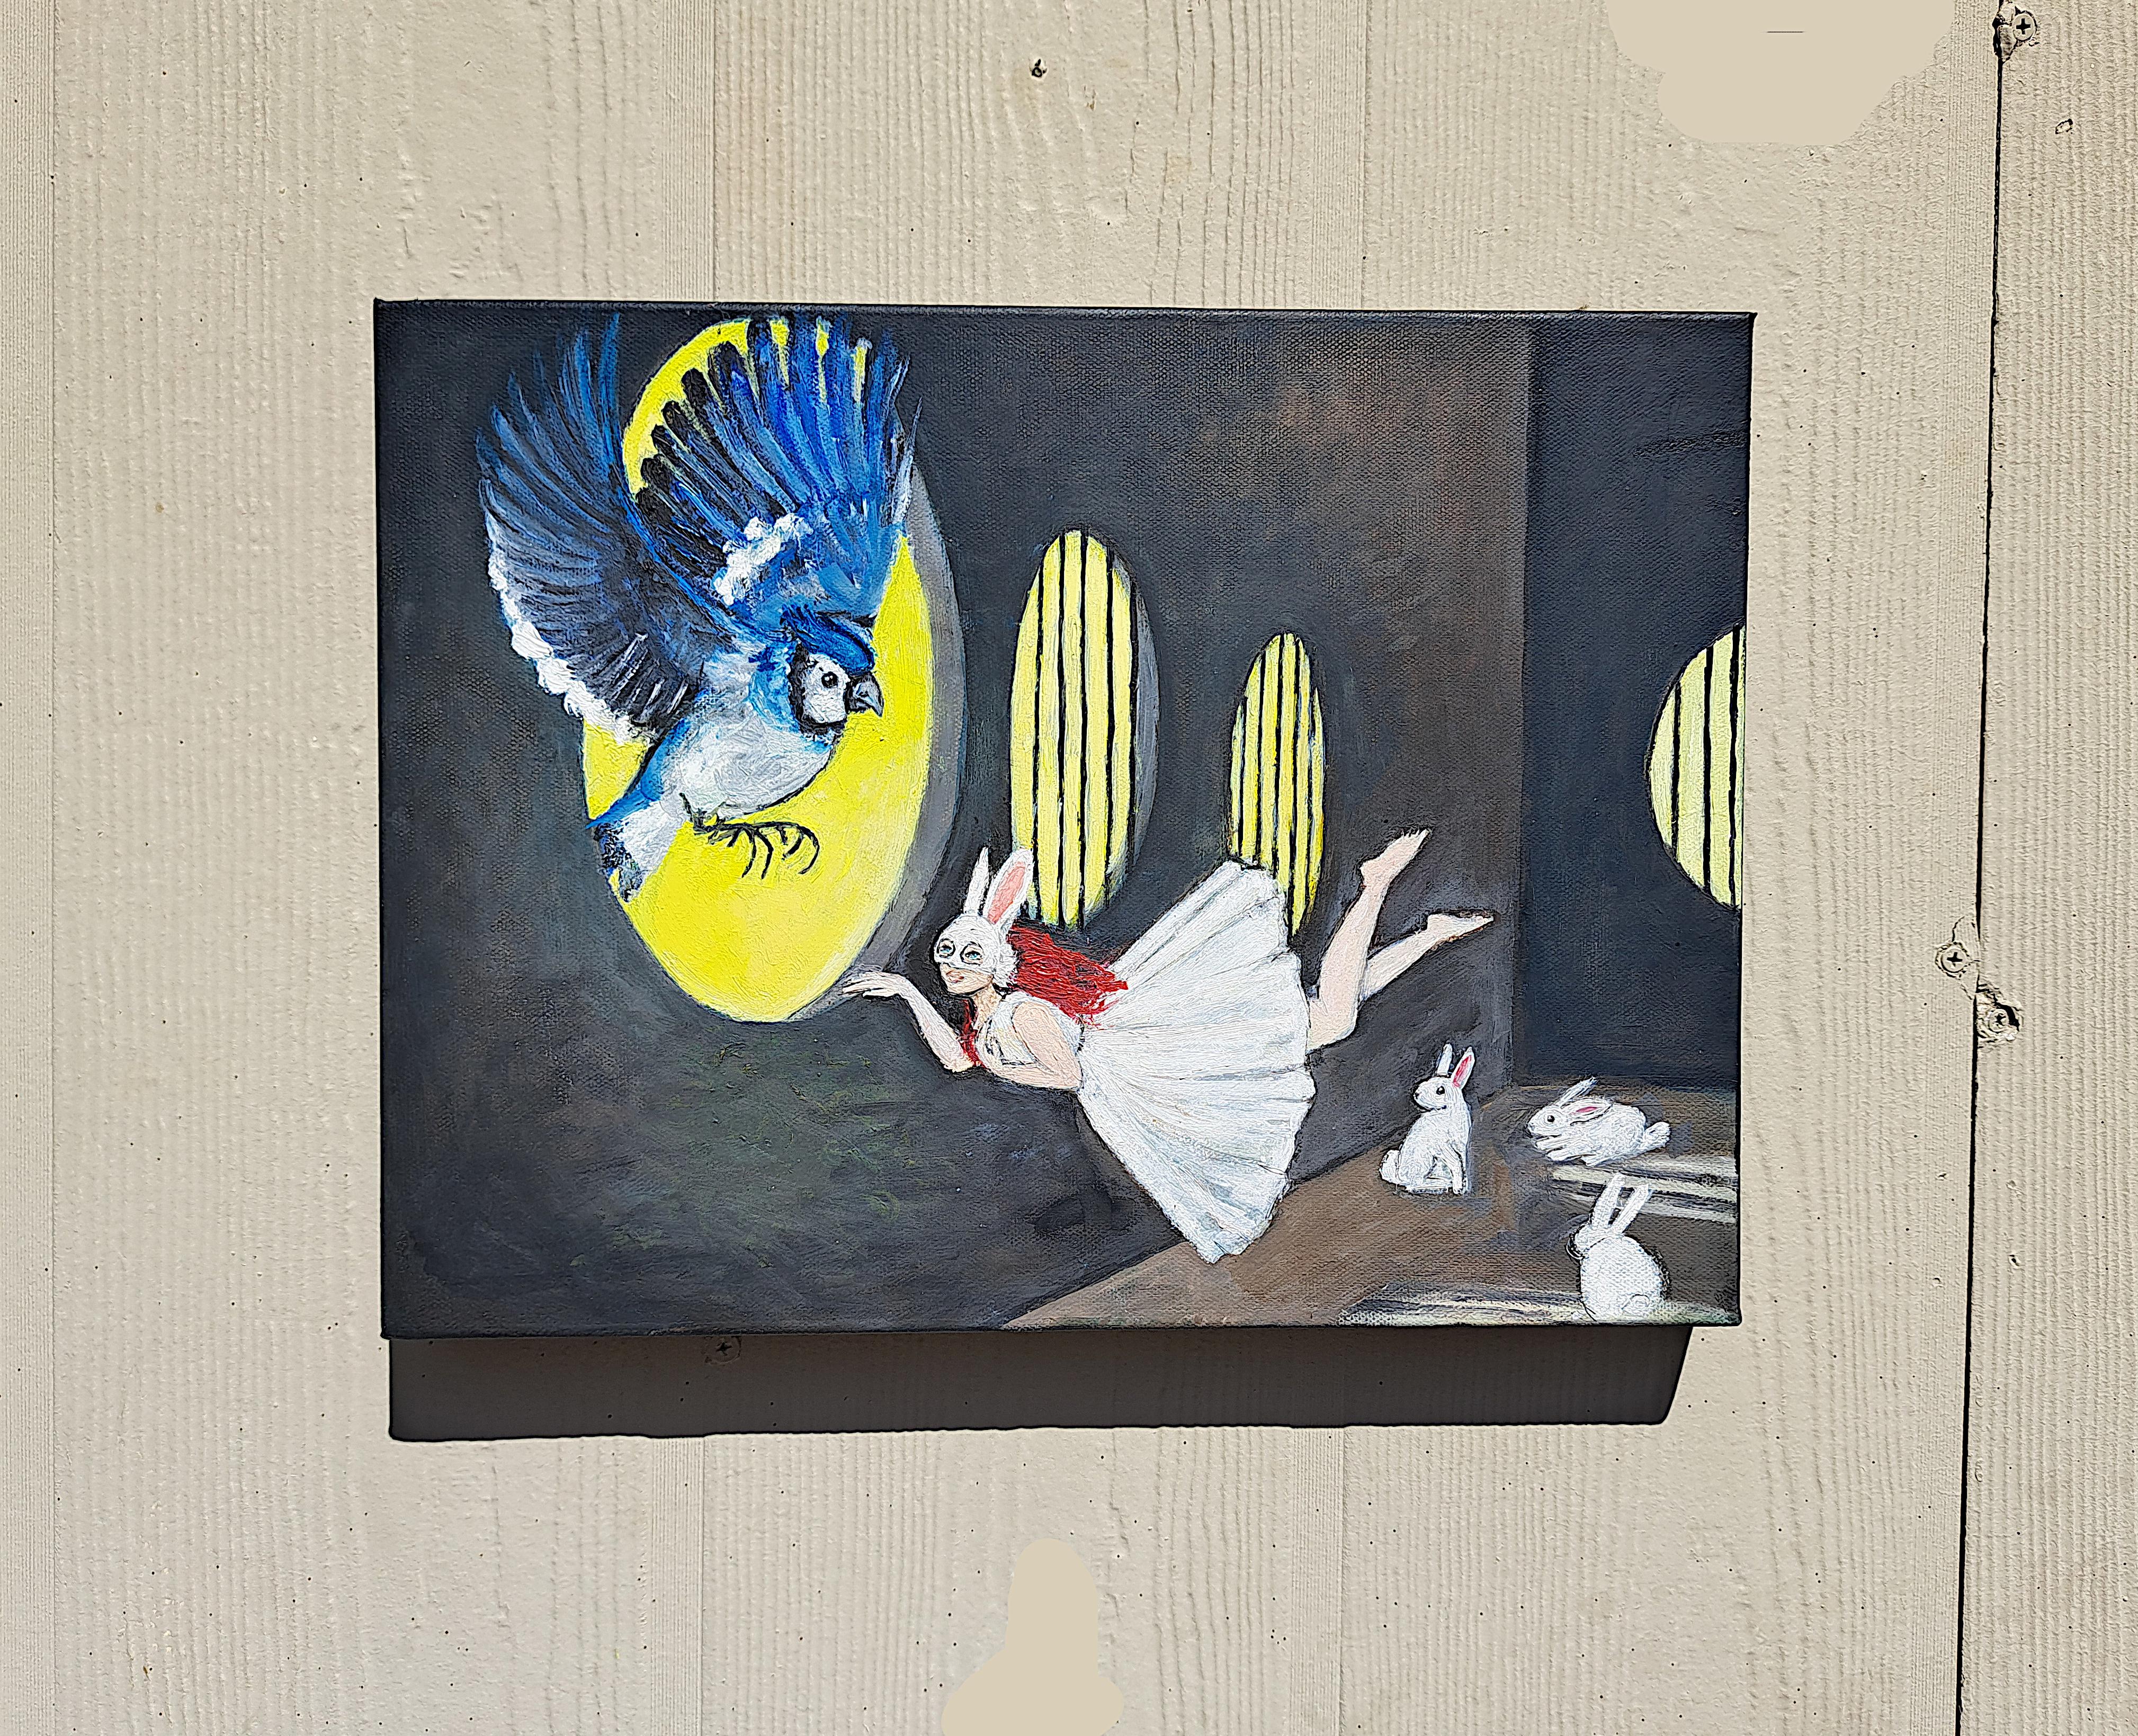 <p>Artist Comments<br>A woman character is shown floating near an open window, where a giant bluebird is waiting as a spirit animal guide. The bird serves as a reminder to not give up and stay on track. The painting portrays the theme of liberation